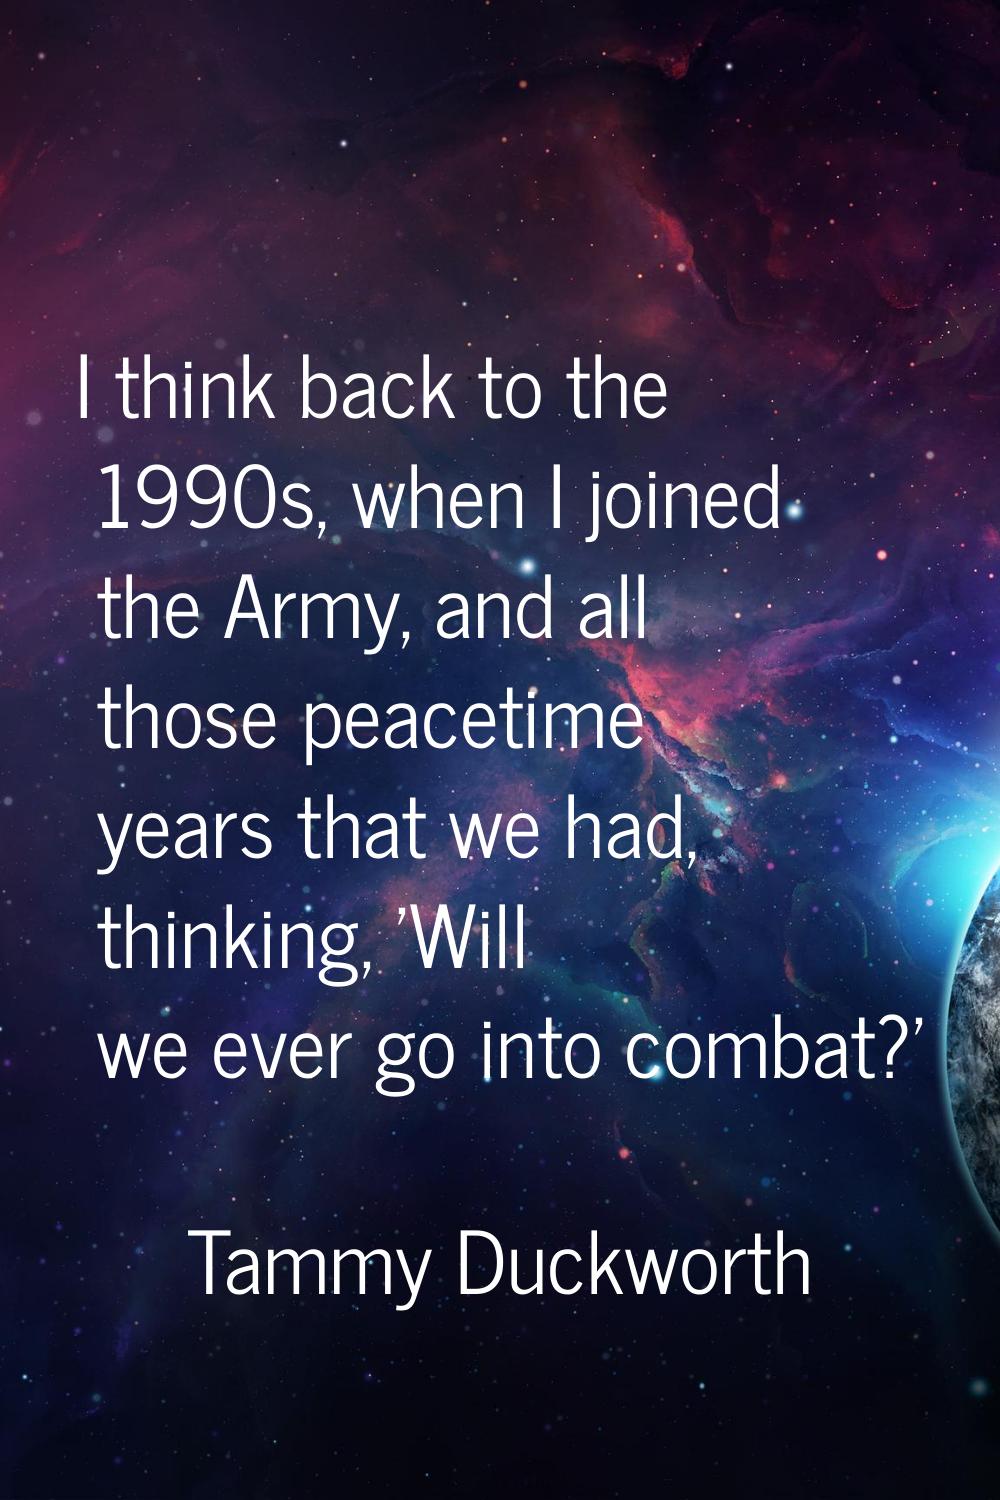 I think back to the 1990s, when I joined the Army, and all those peacetime years that we had, think